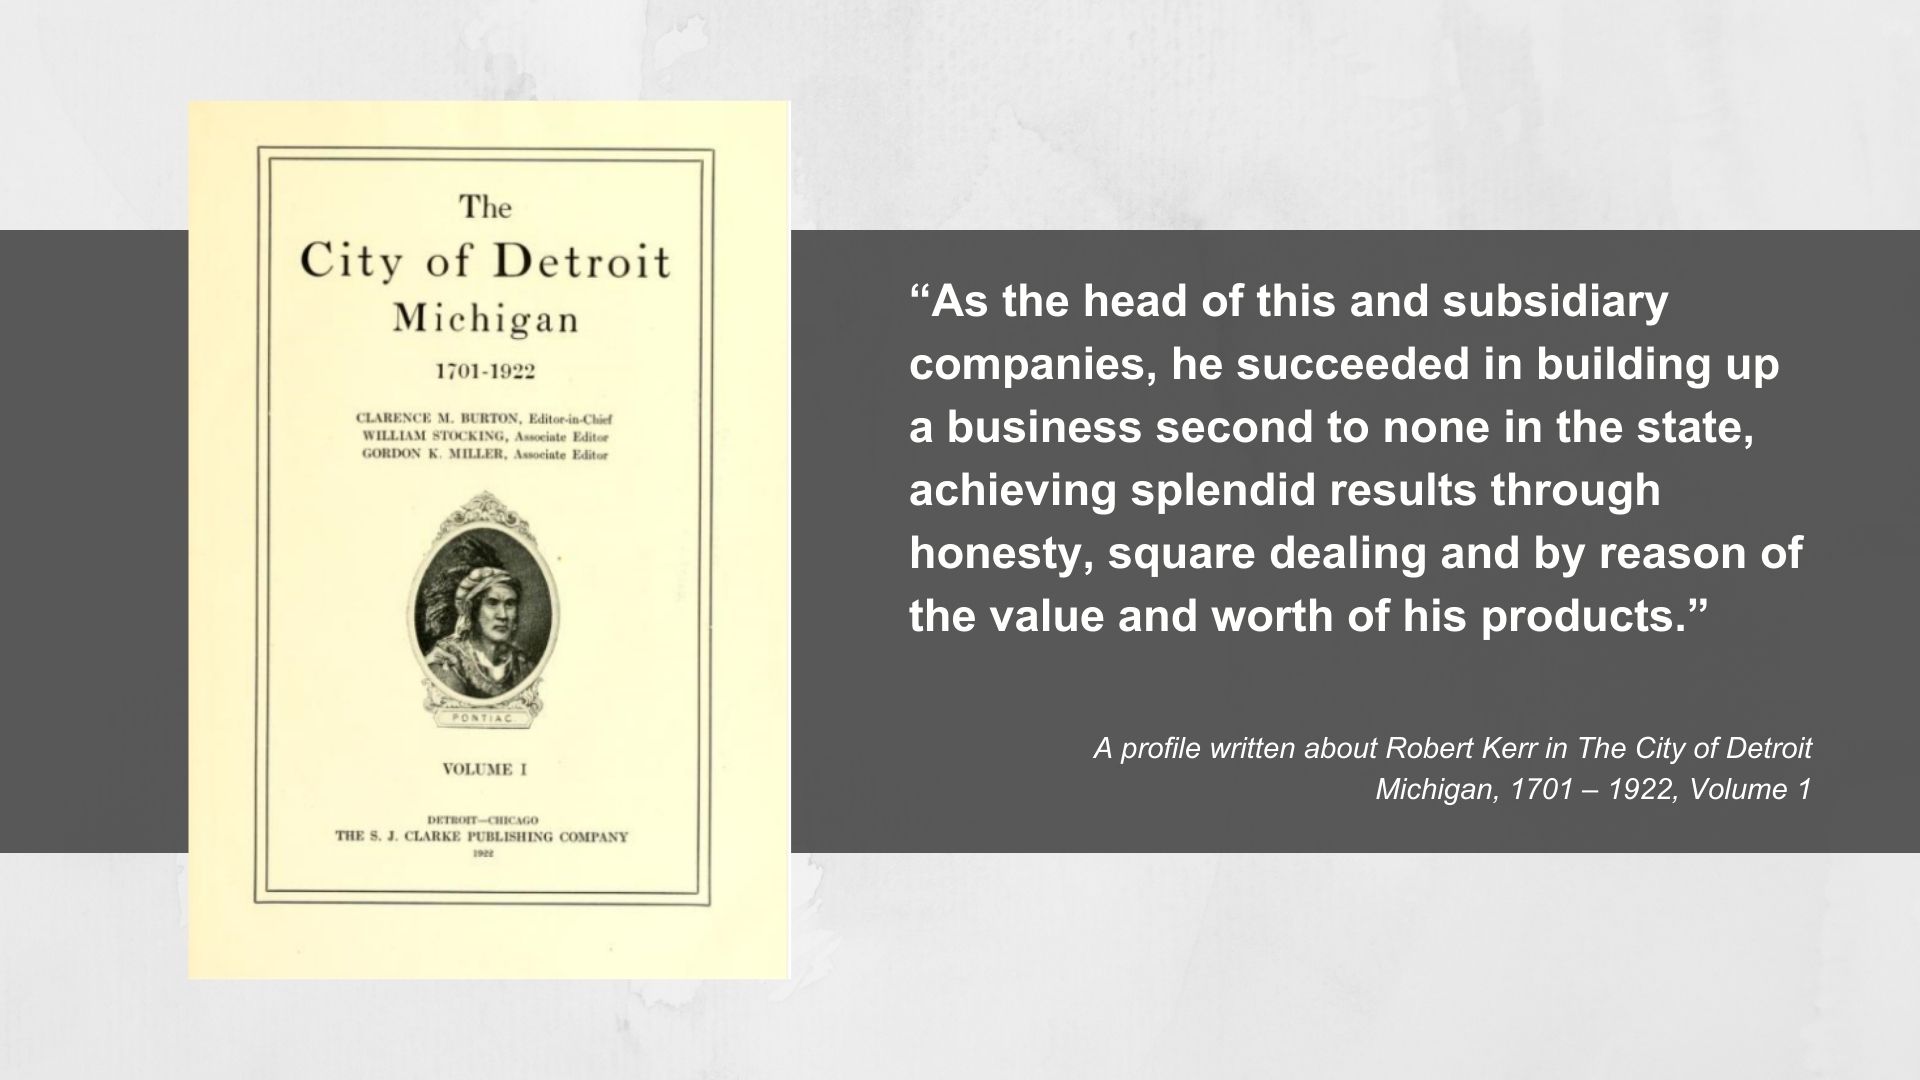 Excerpt from The City of Detroit Michigan, 1701 – 1922, Volume 1